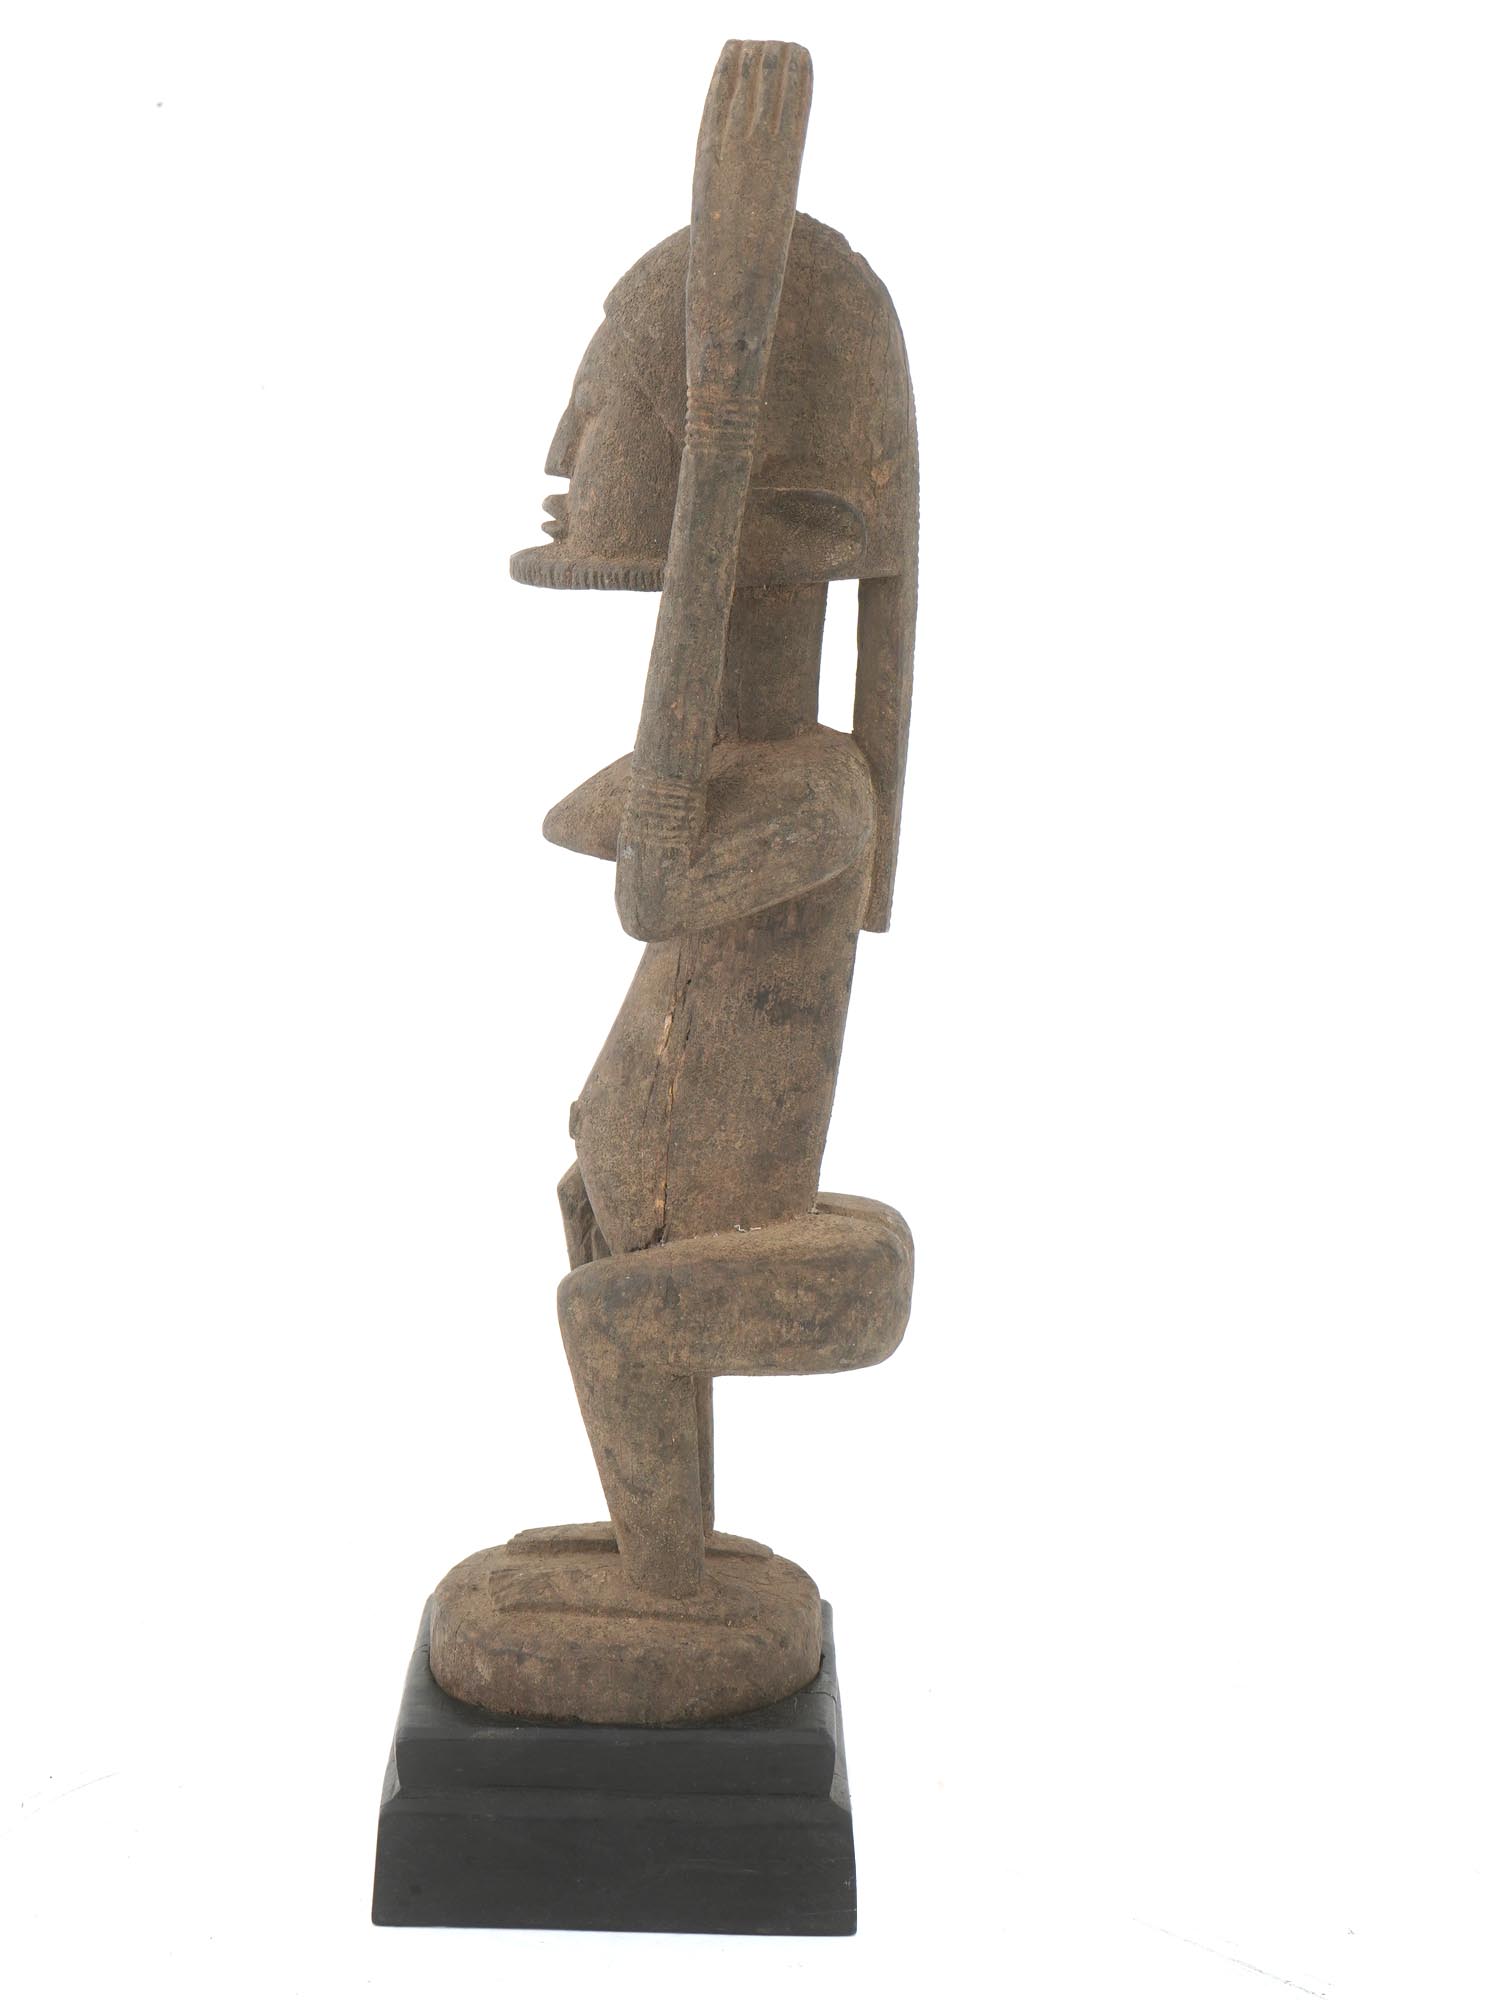 WEST AFRICAN MALI DOGON HAND CARVED WOOD FIGURE PIC-3